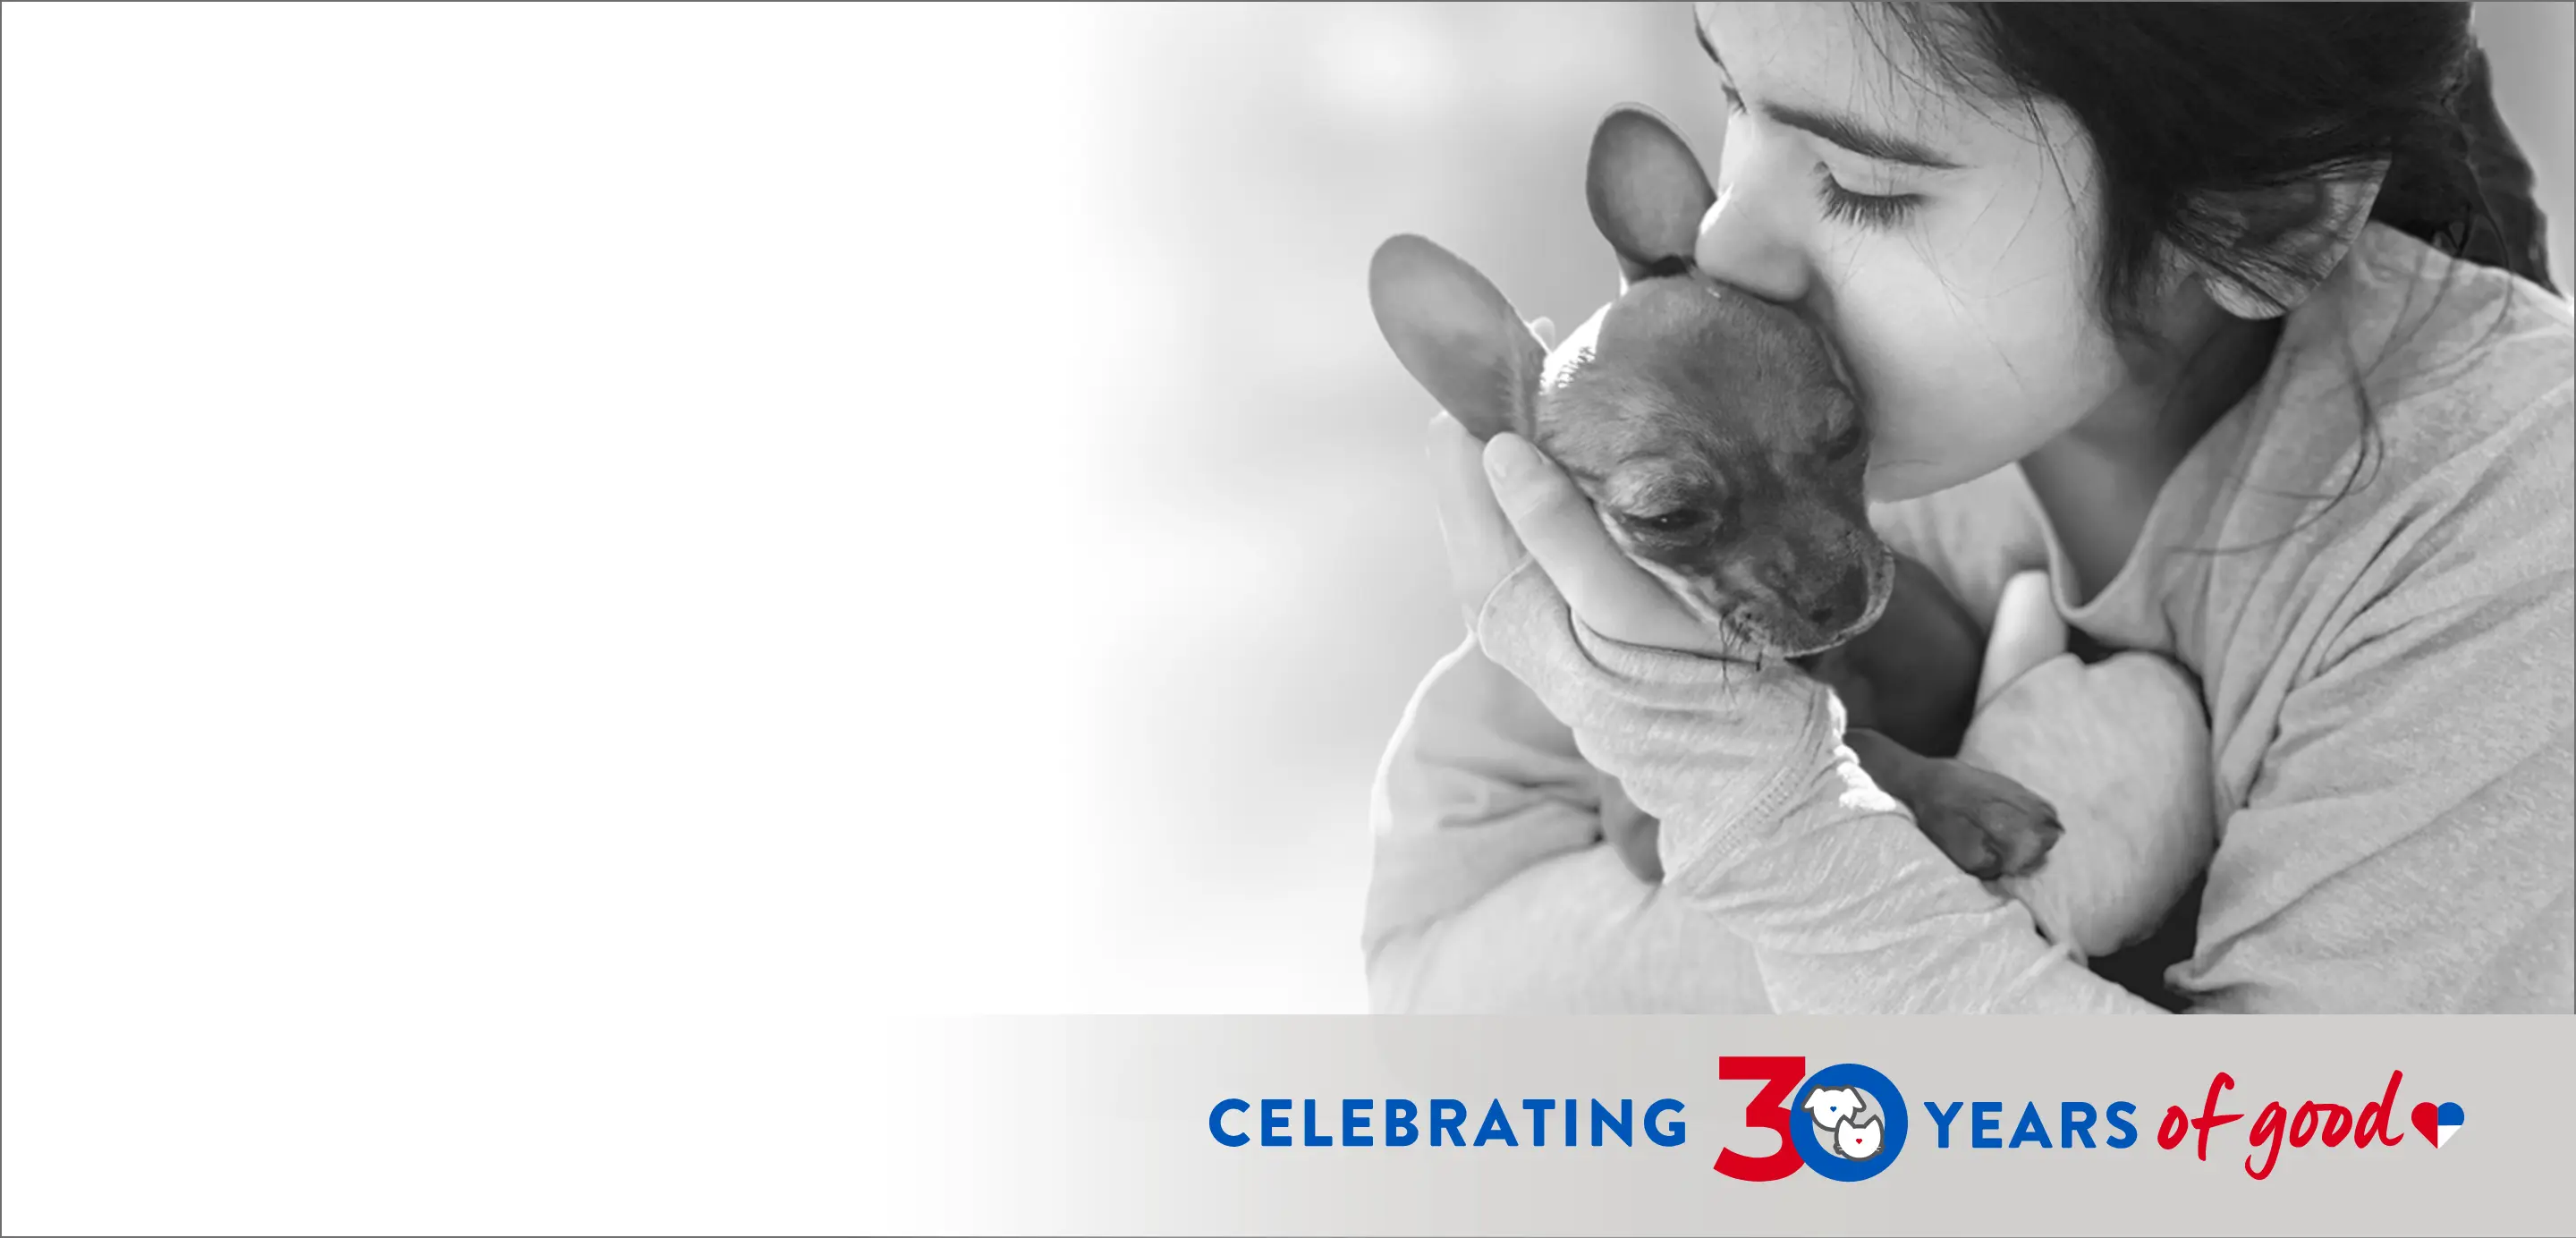 young girl kisses a chihuahua on the side of the head, text that reads "Celebrating 30 Years of Good"